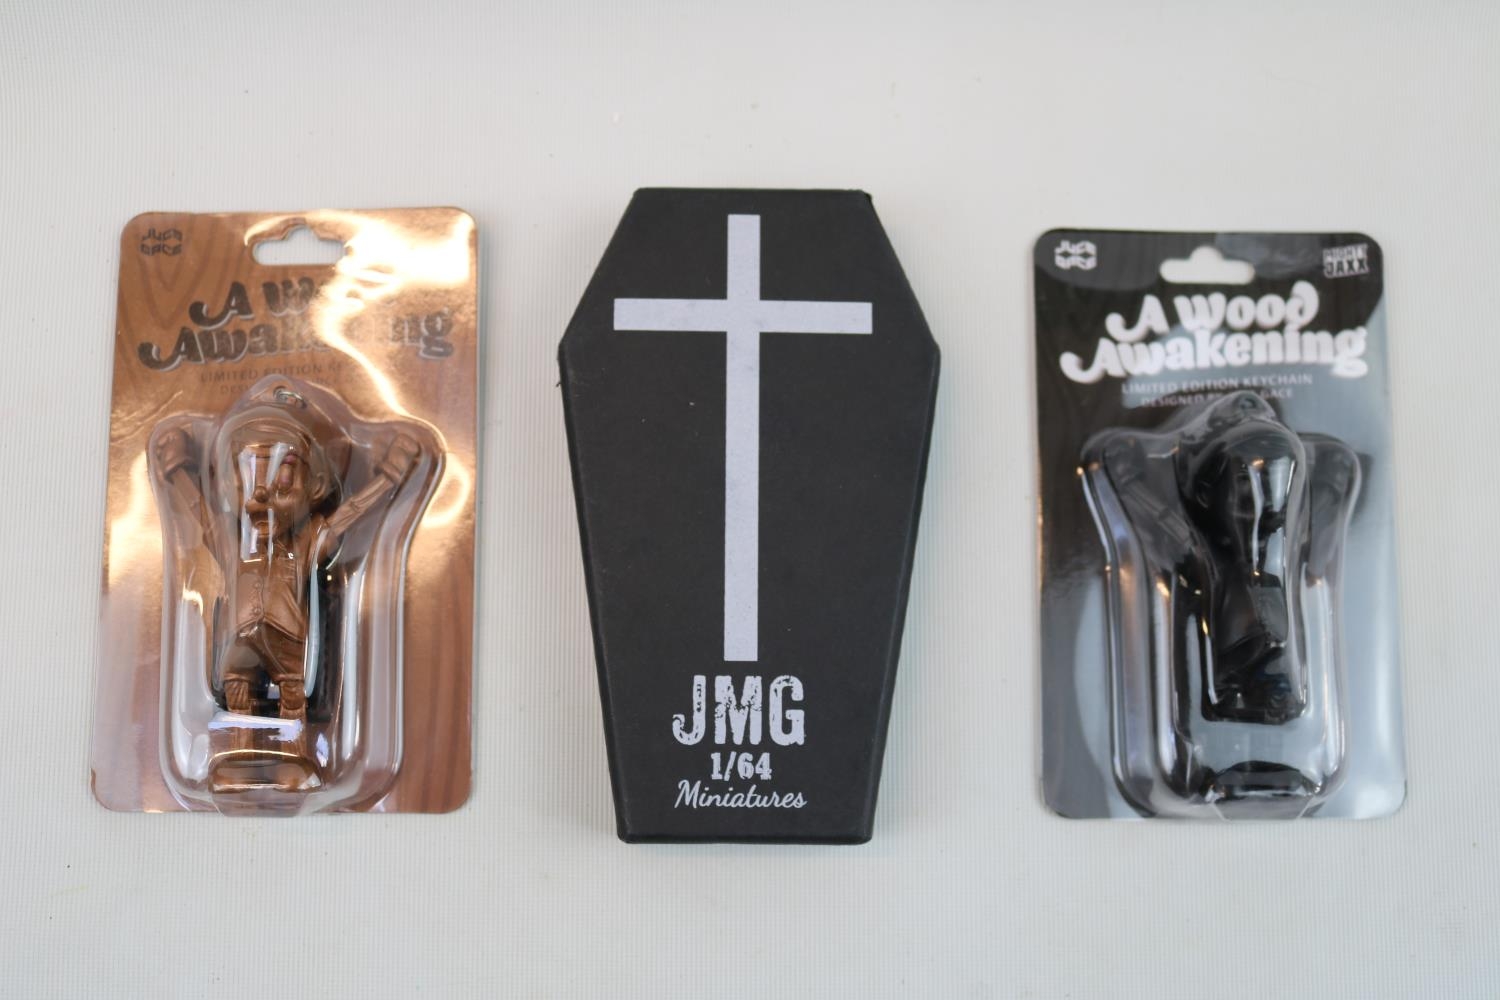 2 Juce Gace Mighty Jaxx A Wood Awakening Limited edition Keychain in Black and Rose Gold and a JMG